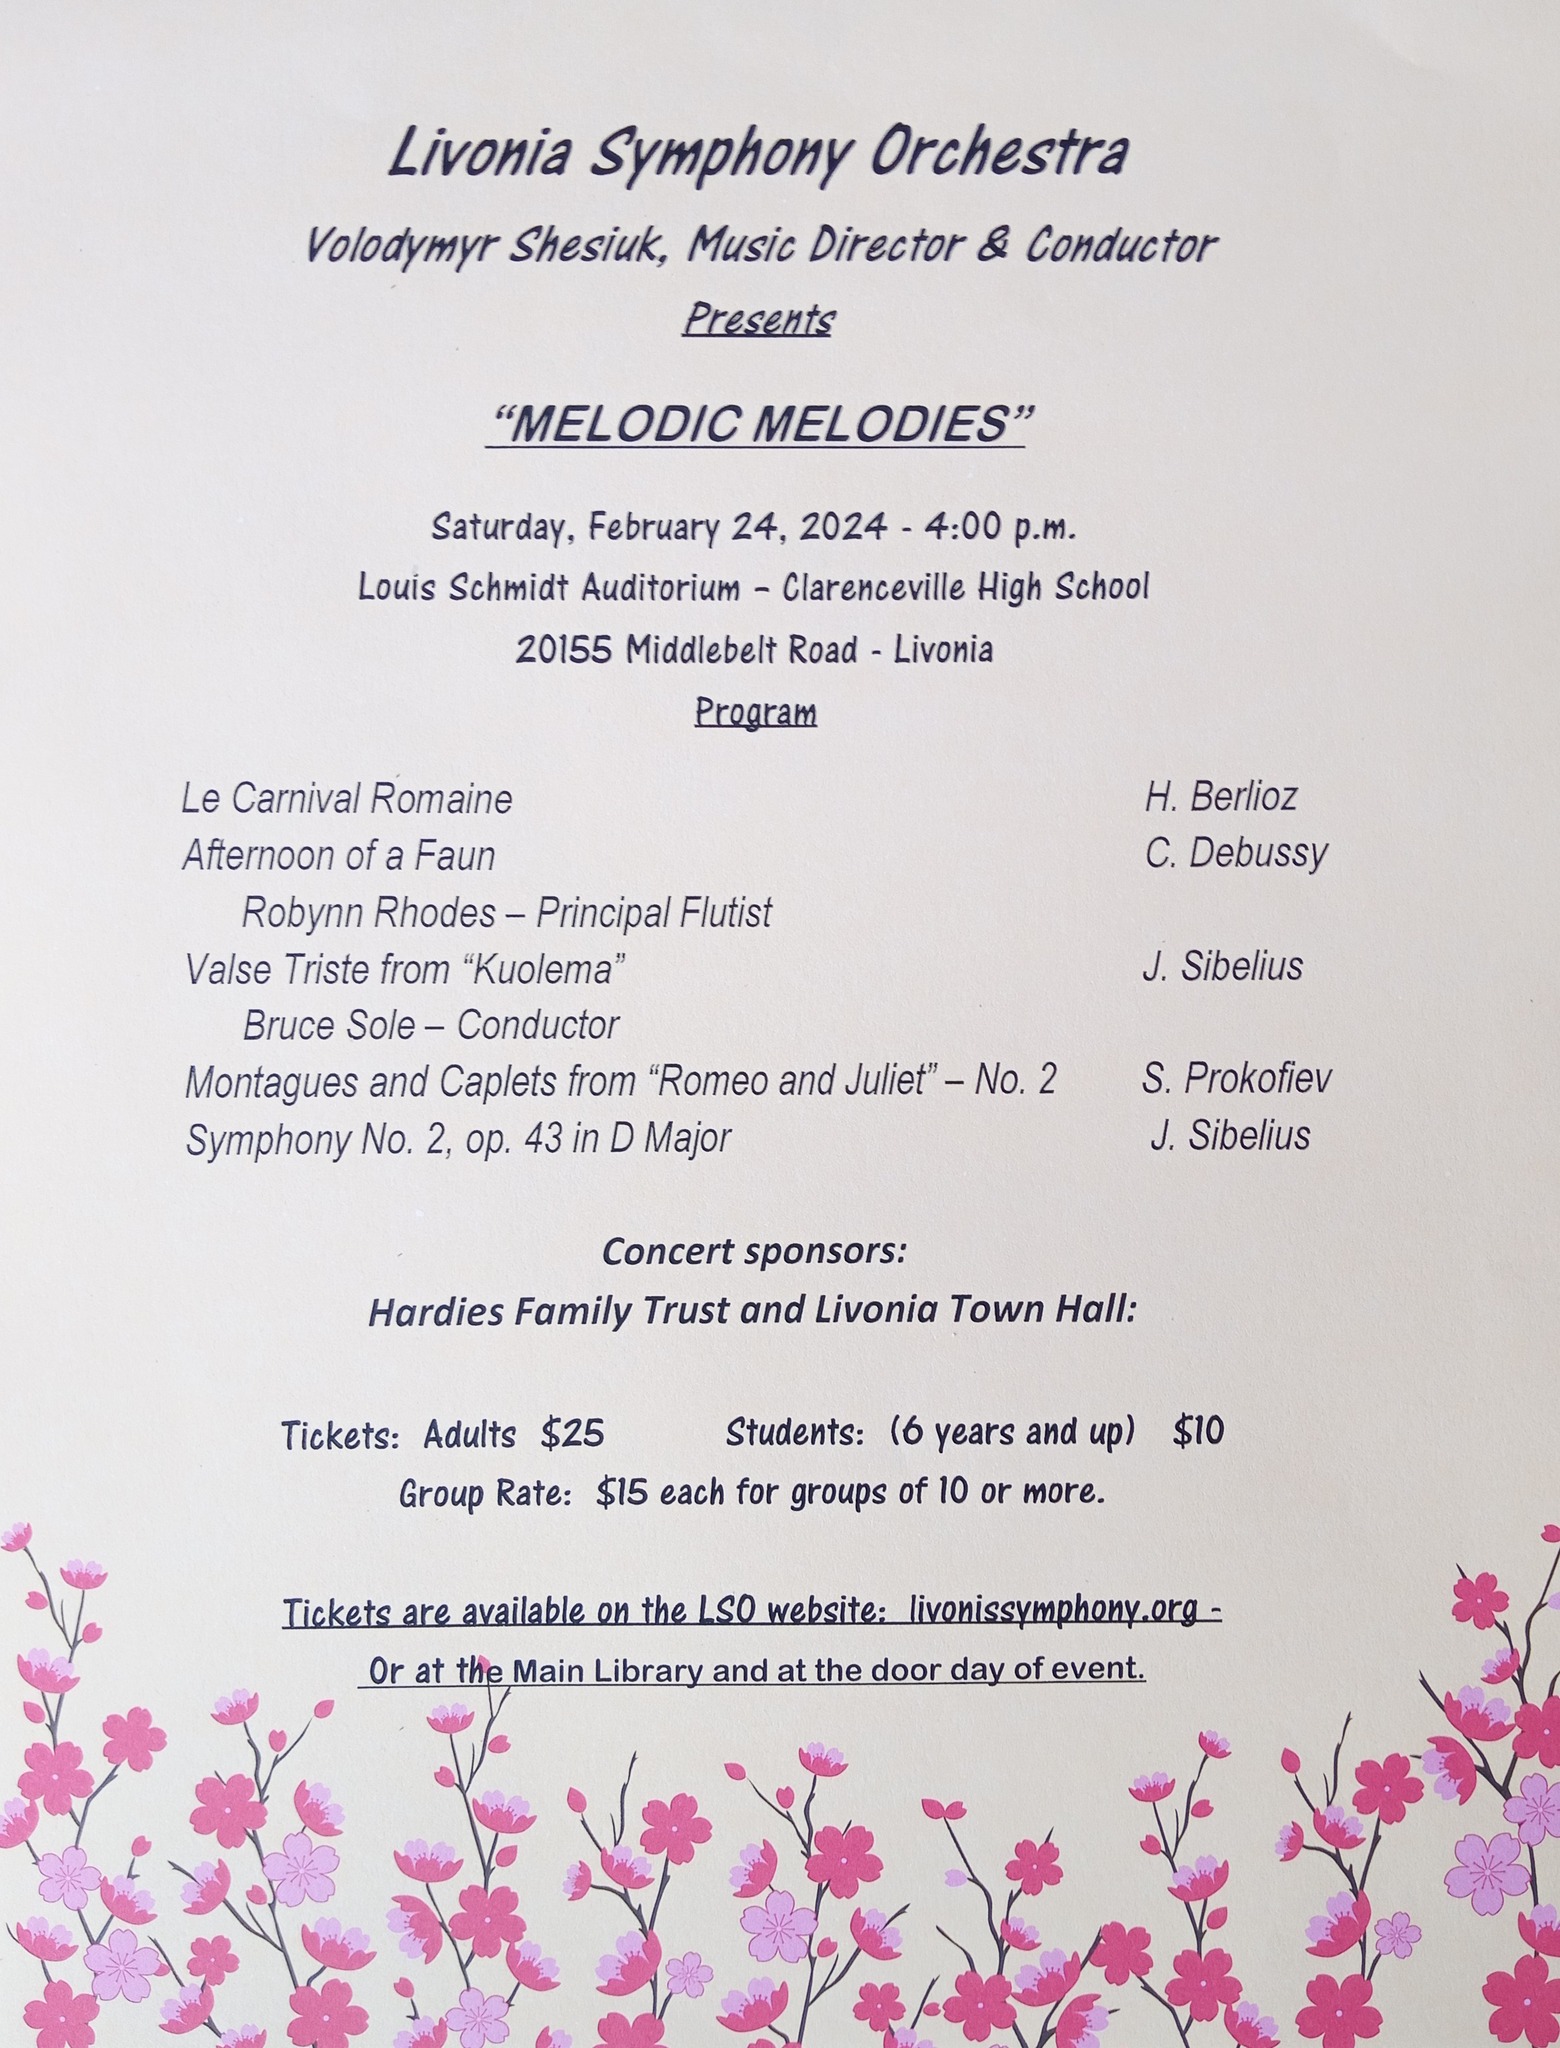 Livonia Symphony Orchestra "Melodic Melodies"